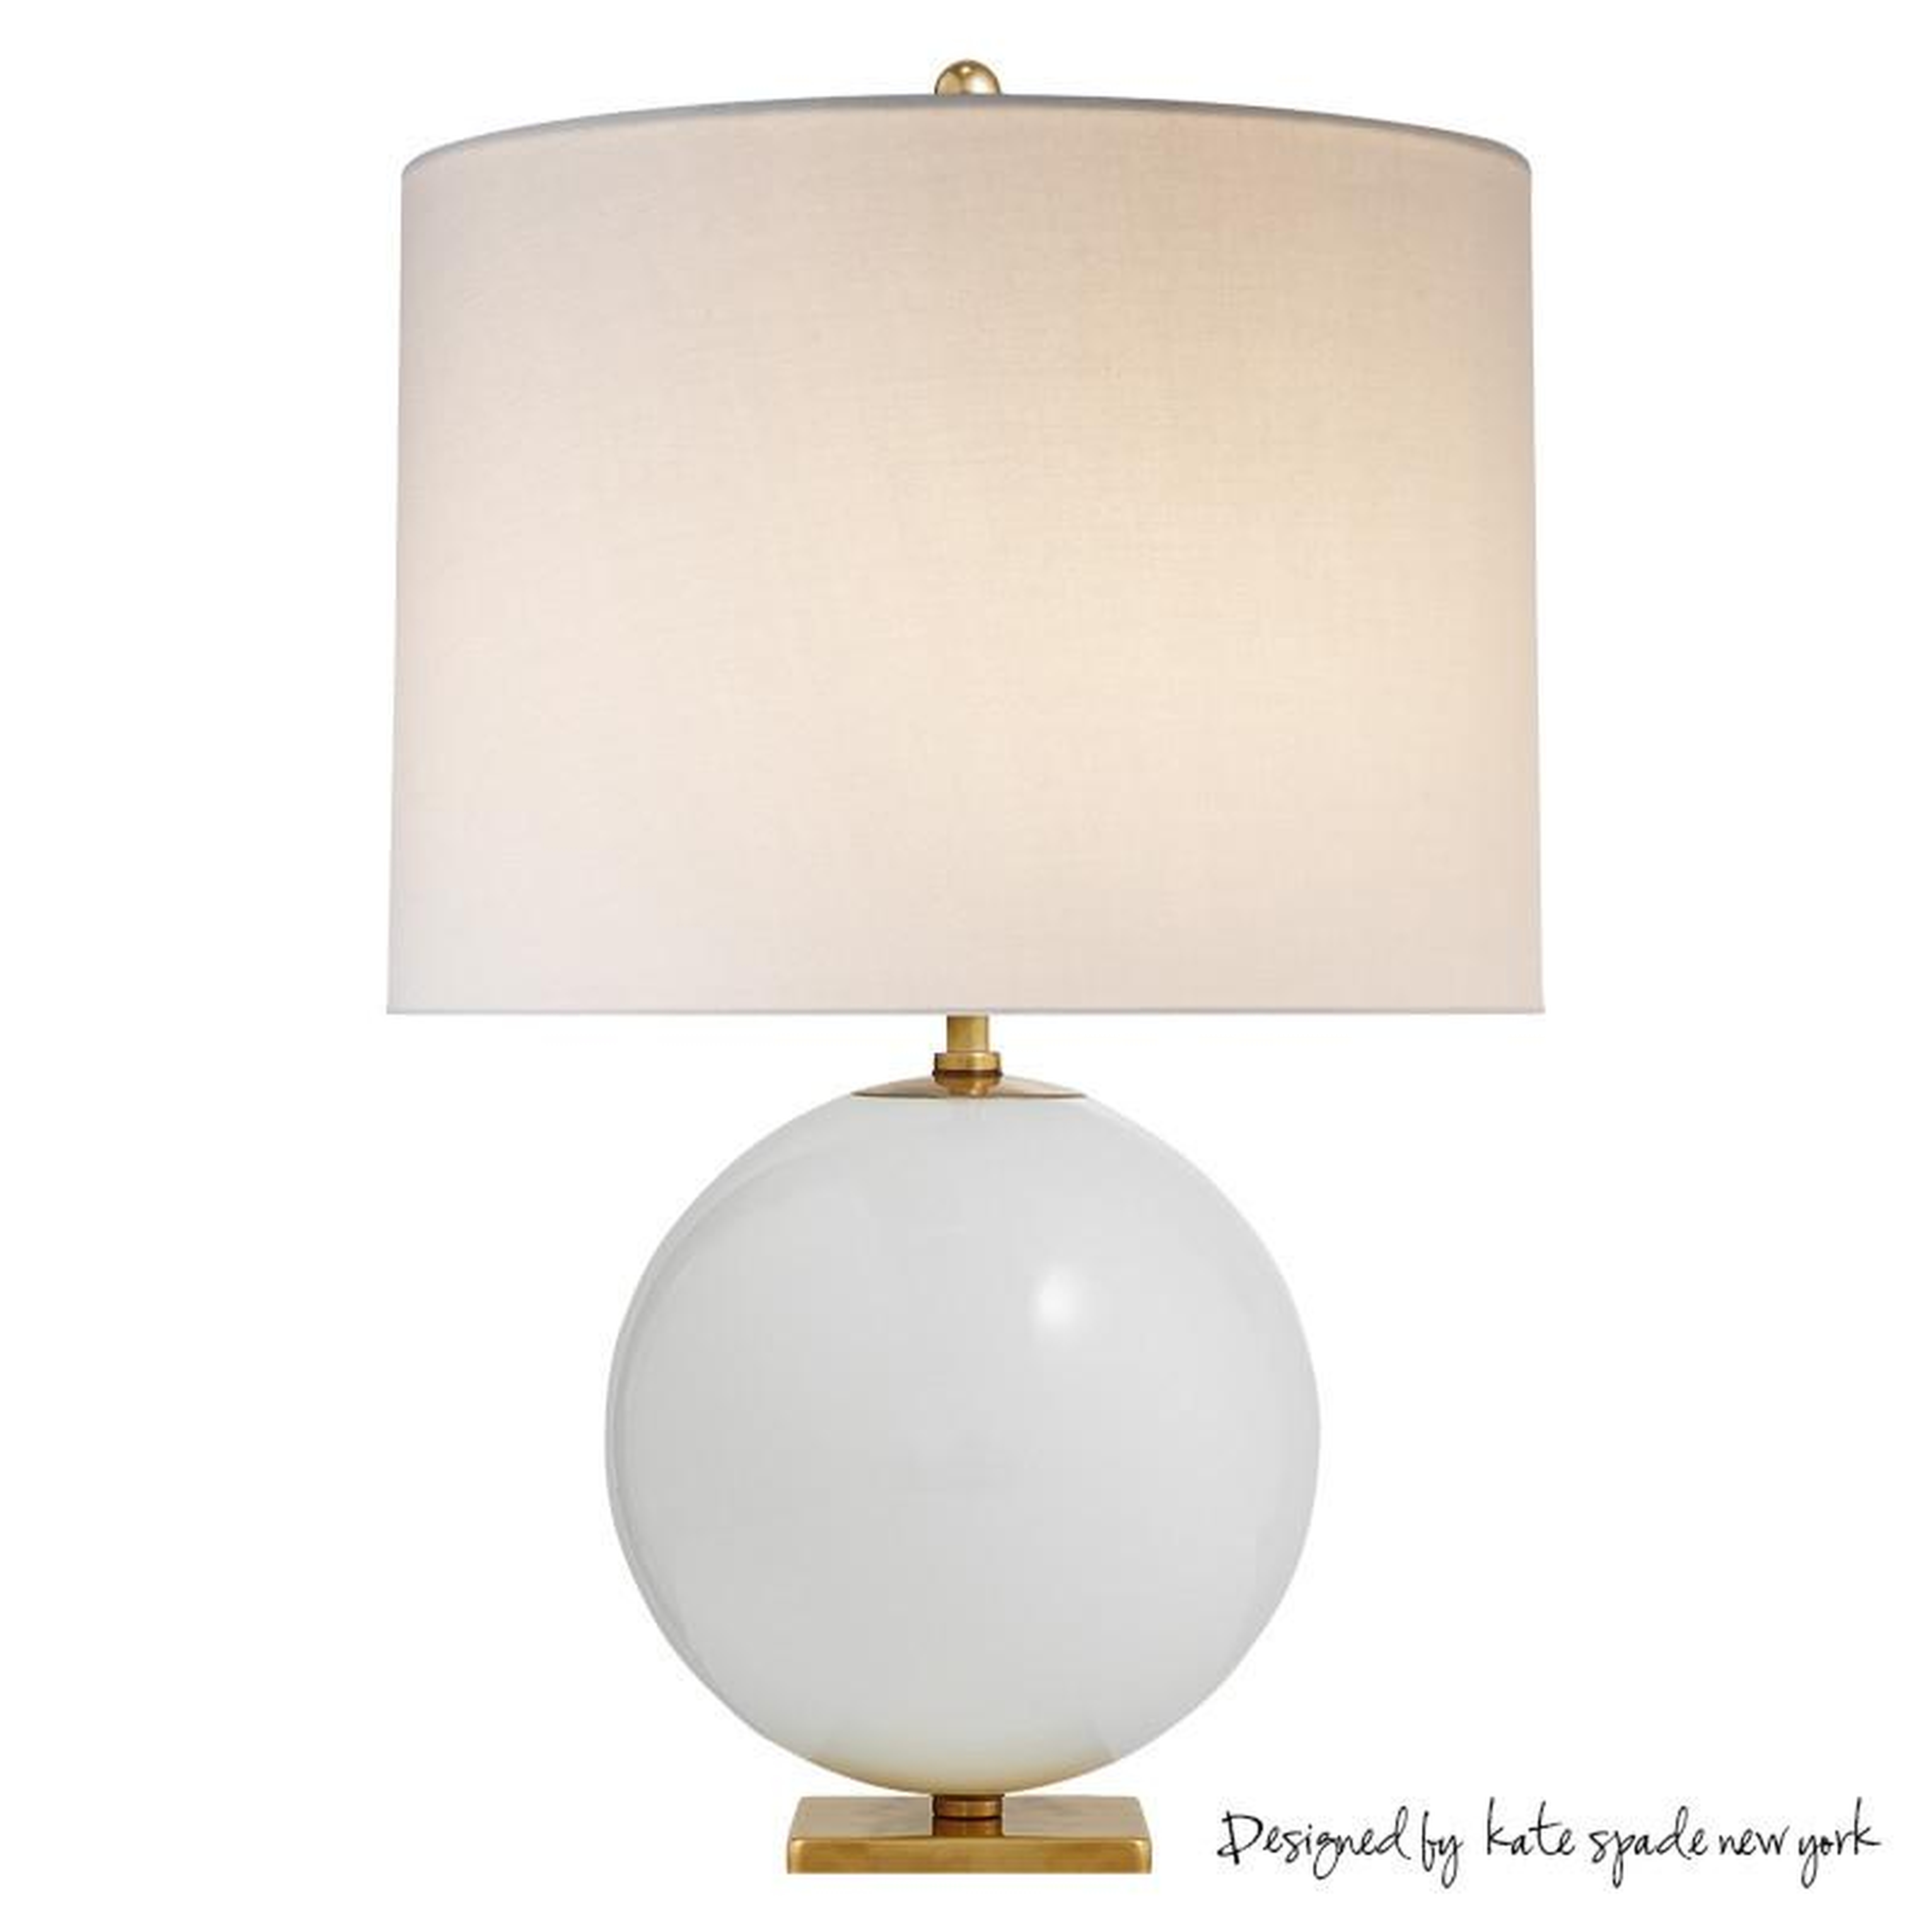 ELSIE TABLE LAMP WITH CREAM LINEN SHADE - CREAM - McGee & Co.